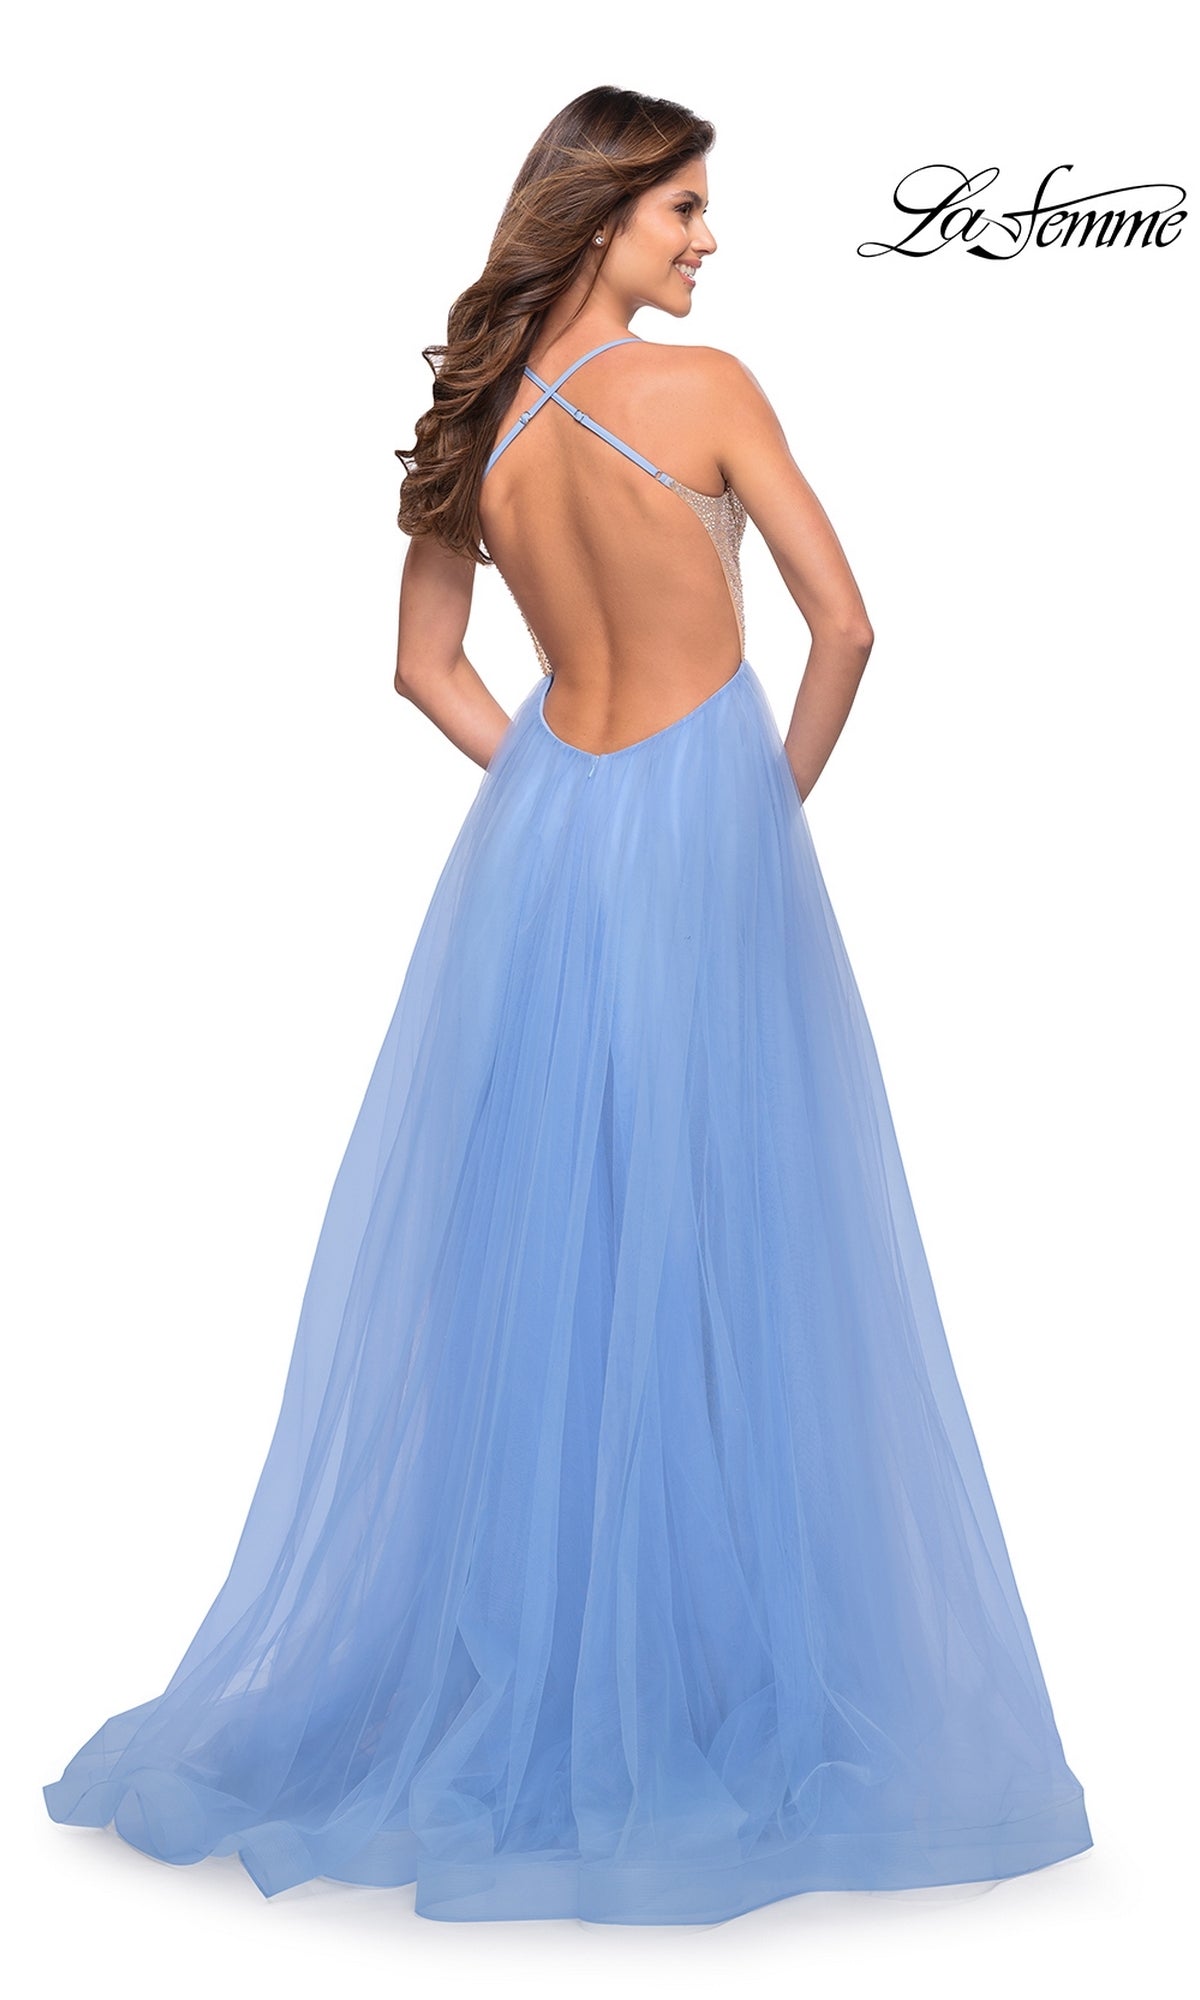 Pastel Tulle Fluffy Long Ball Gown by La Femme